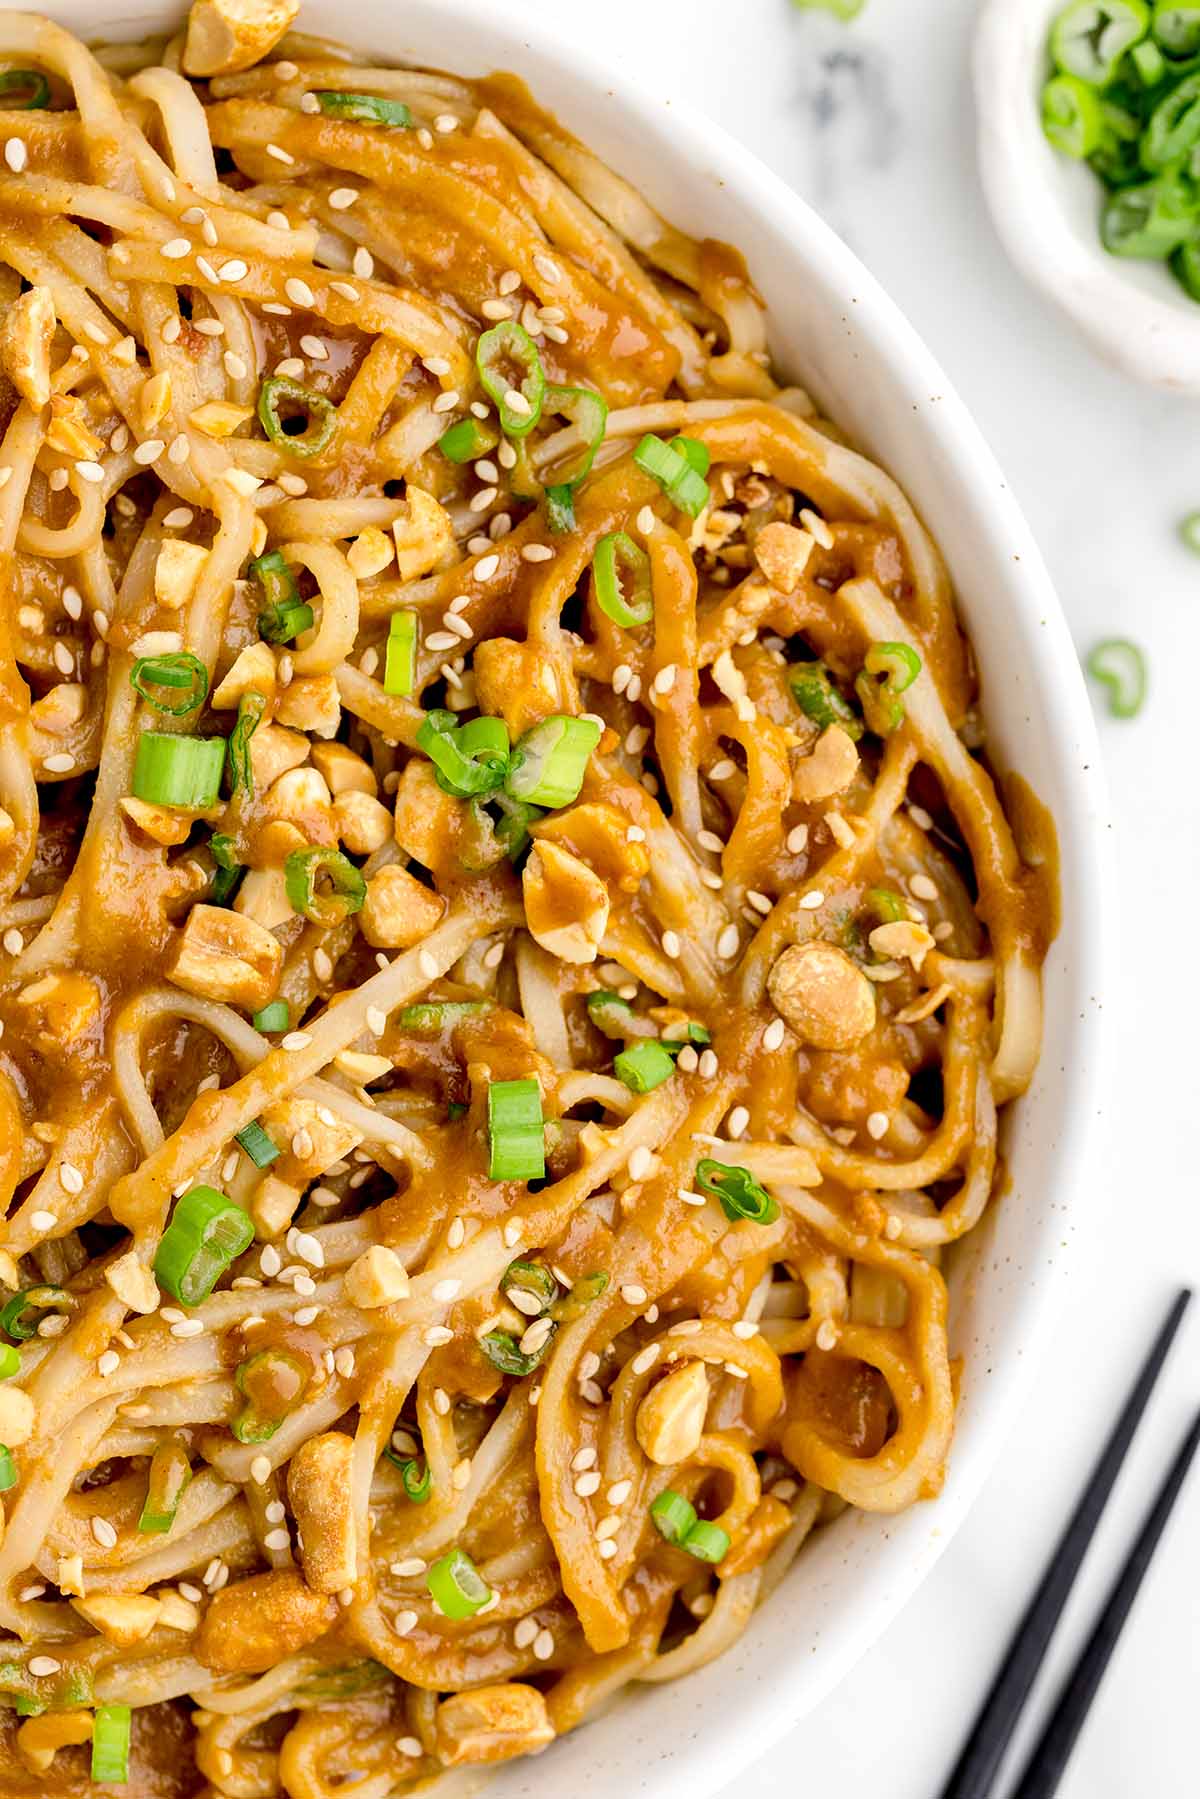 Peanut Noodles garnished with sesame seeds and scallions